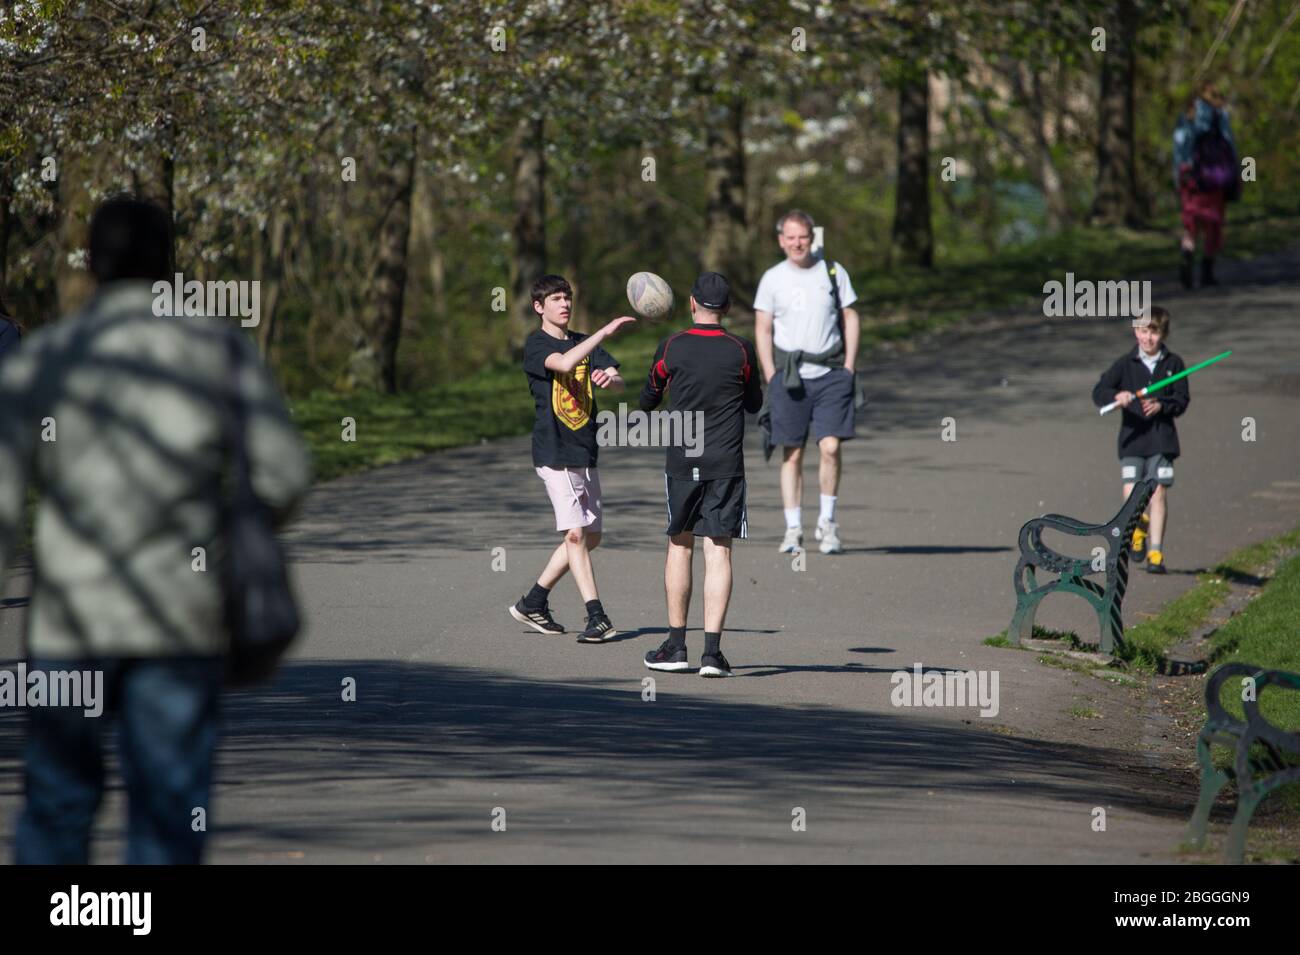 Glasgow, UK. 21st Apr, 2020. Pictured: People take their daily exercise in the park in the form of ball games such as passing a rugby ball back and forth. Scenes from Kelvingrove Park in Glasgow during the coronavirus (COVID-19) lockdown. Credit: Colin Fisher/Alamy Live News Stock Photo